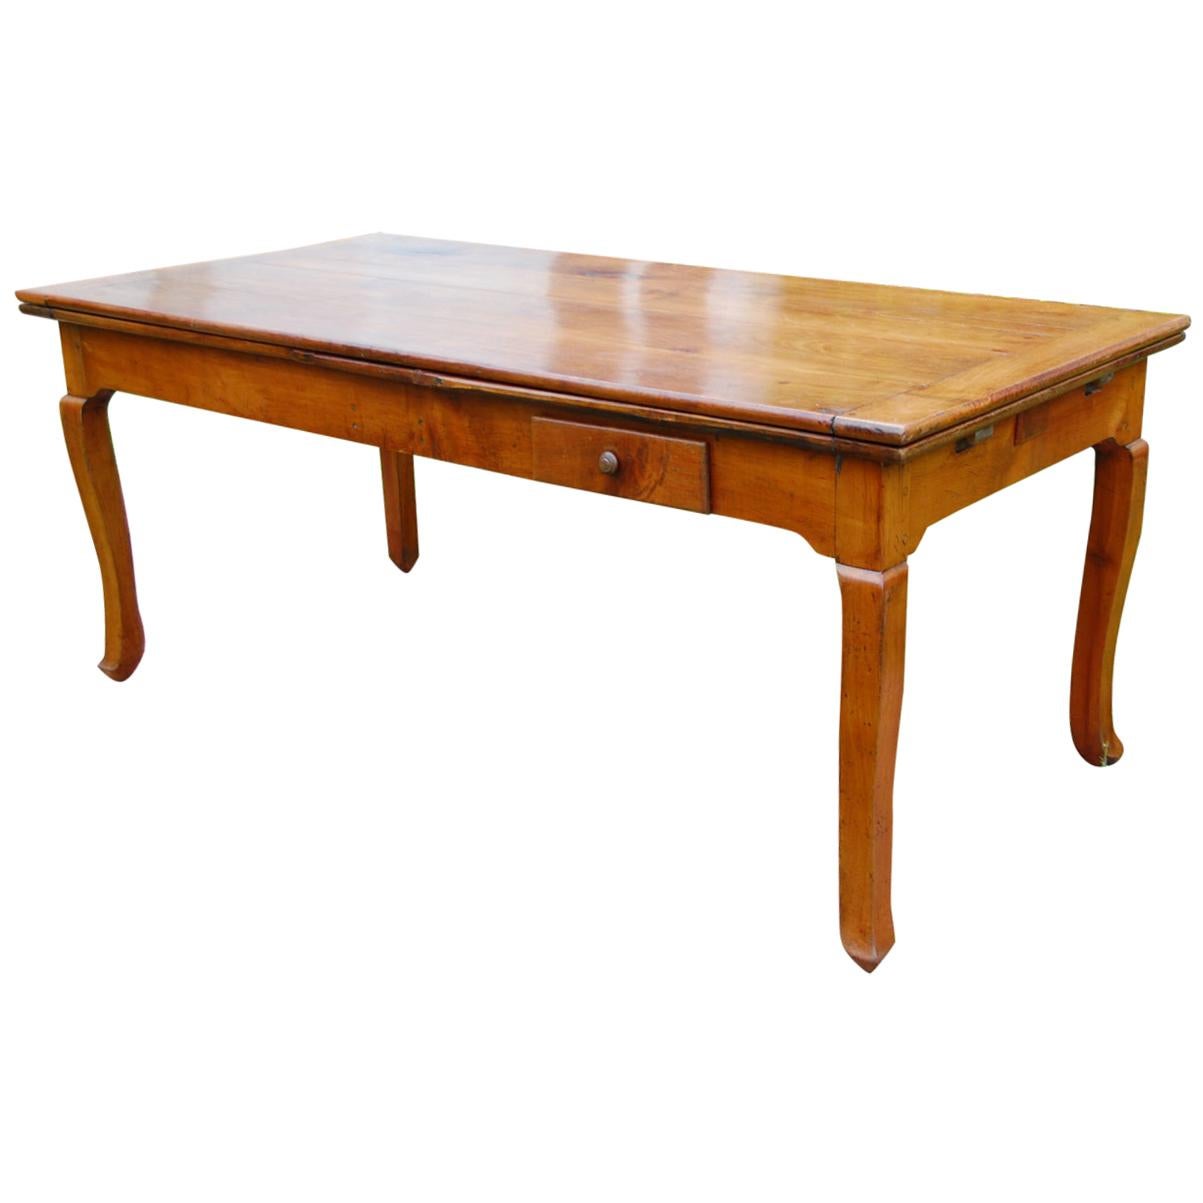 French Provincial Cherry Farmhouse Extending Table with Cabriole Legs